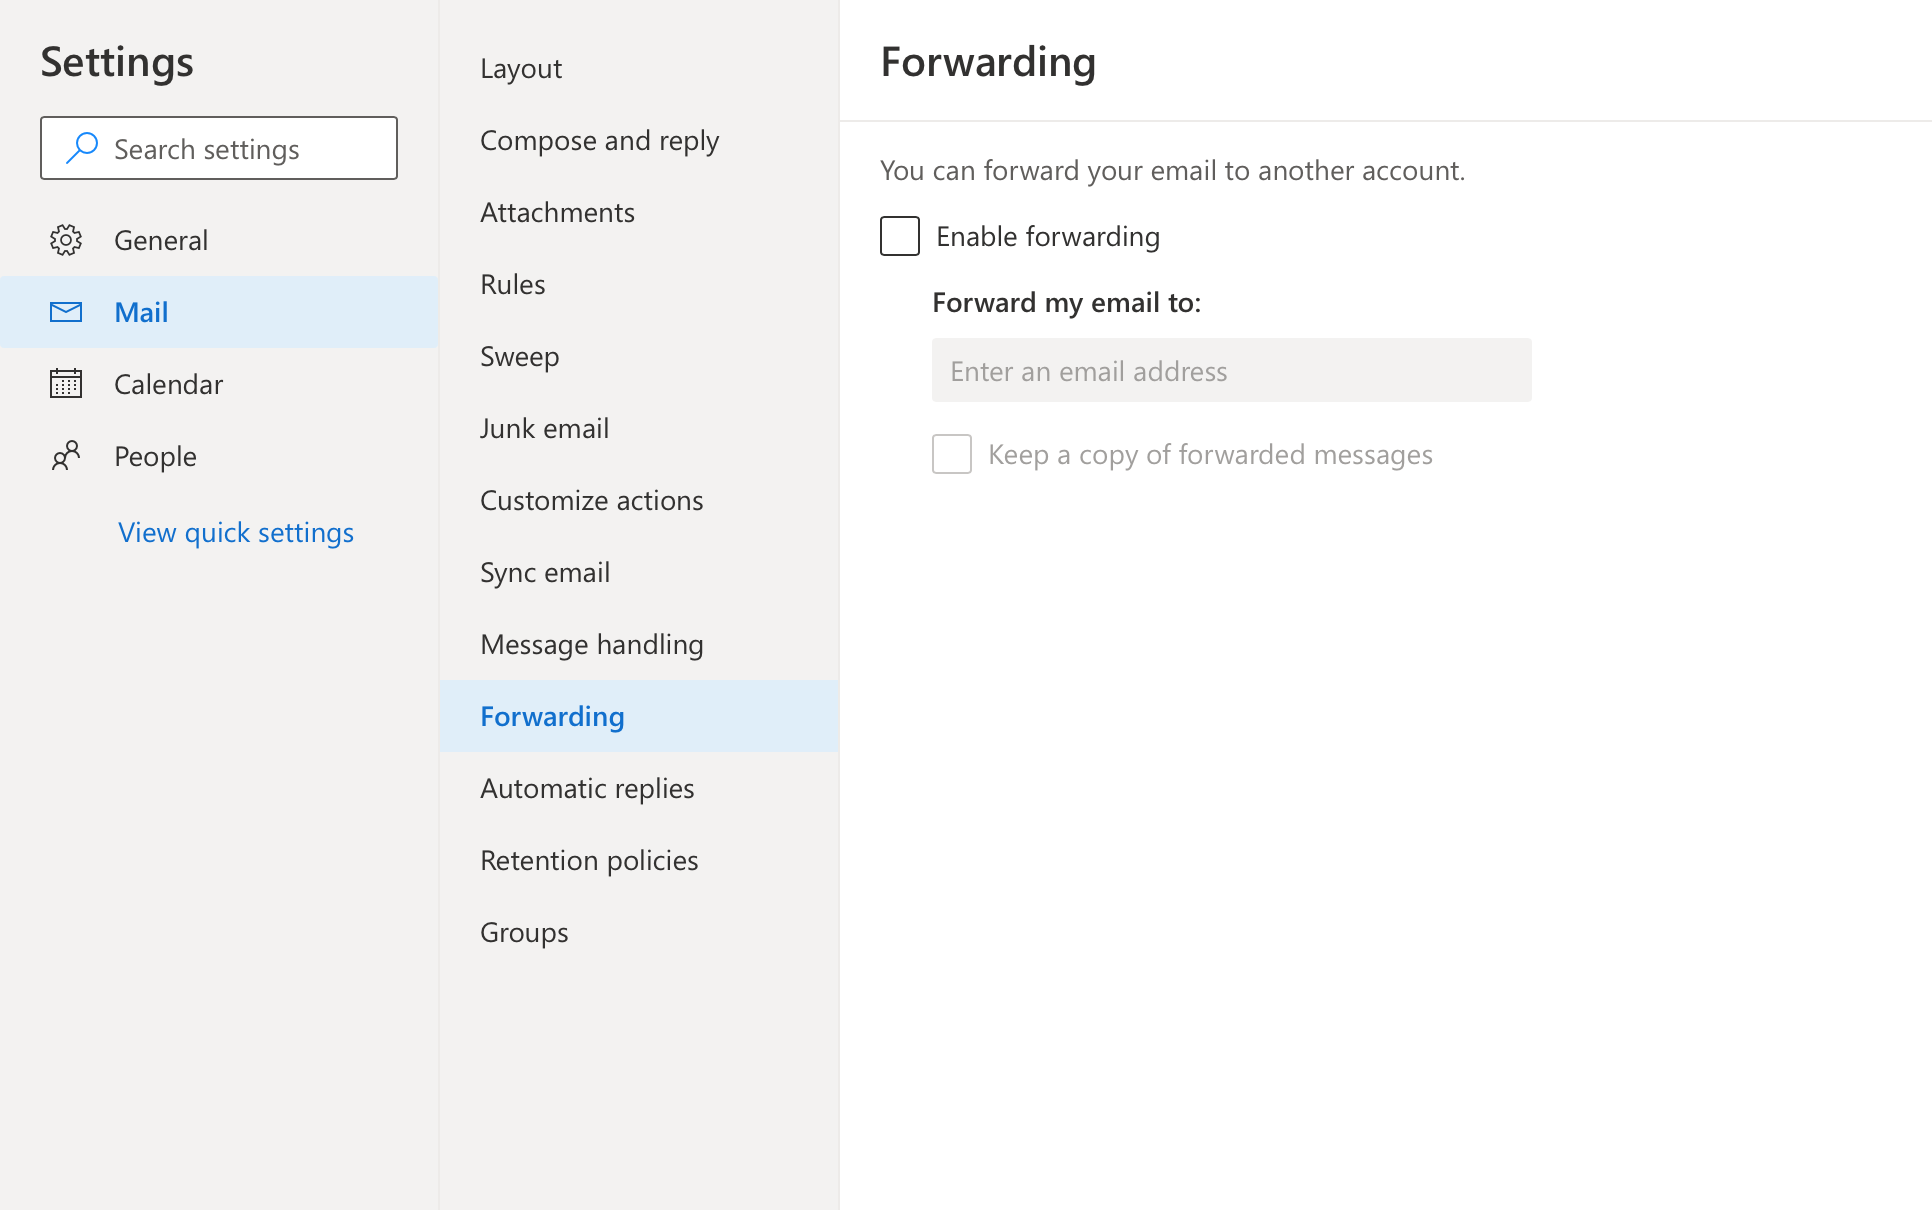 Forwarding page within Outlook